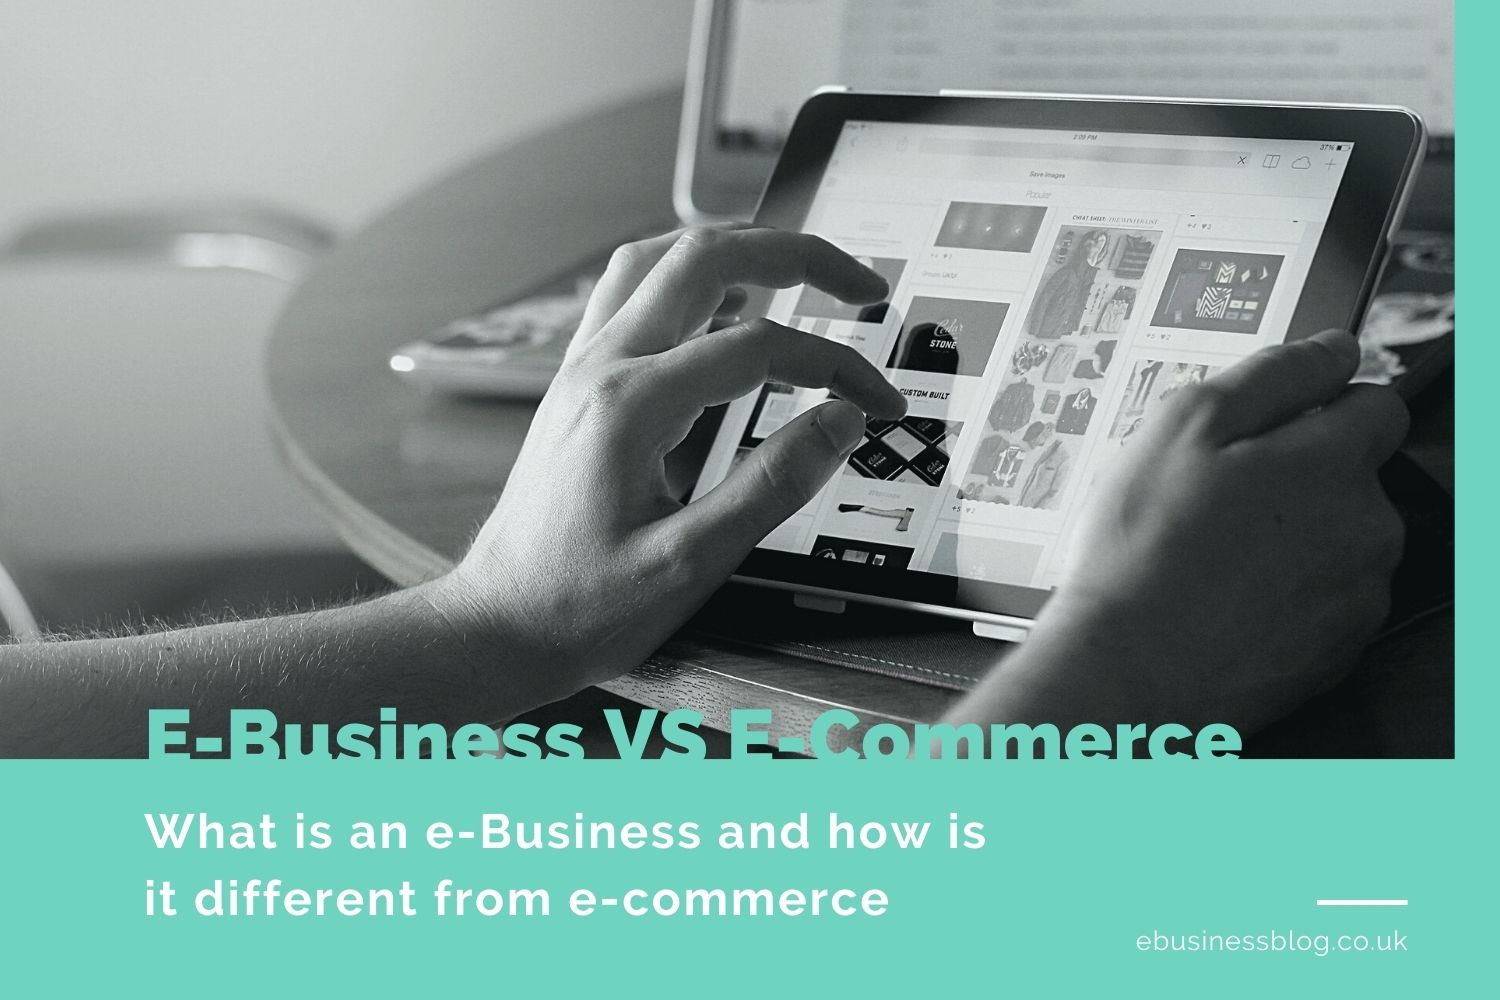 What is an e-Business and how is it different from e-commerce